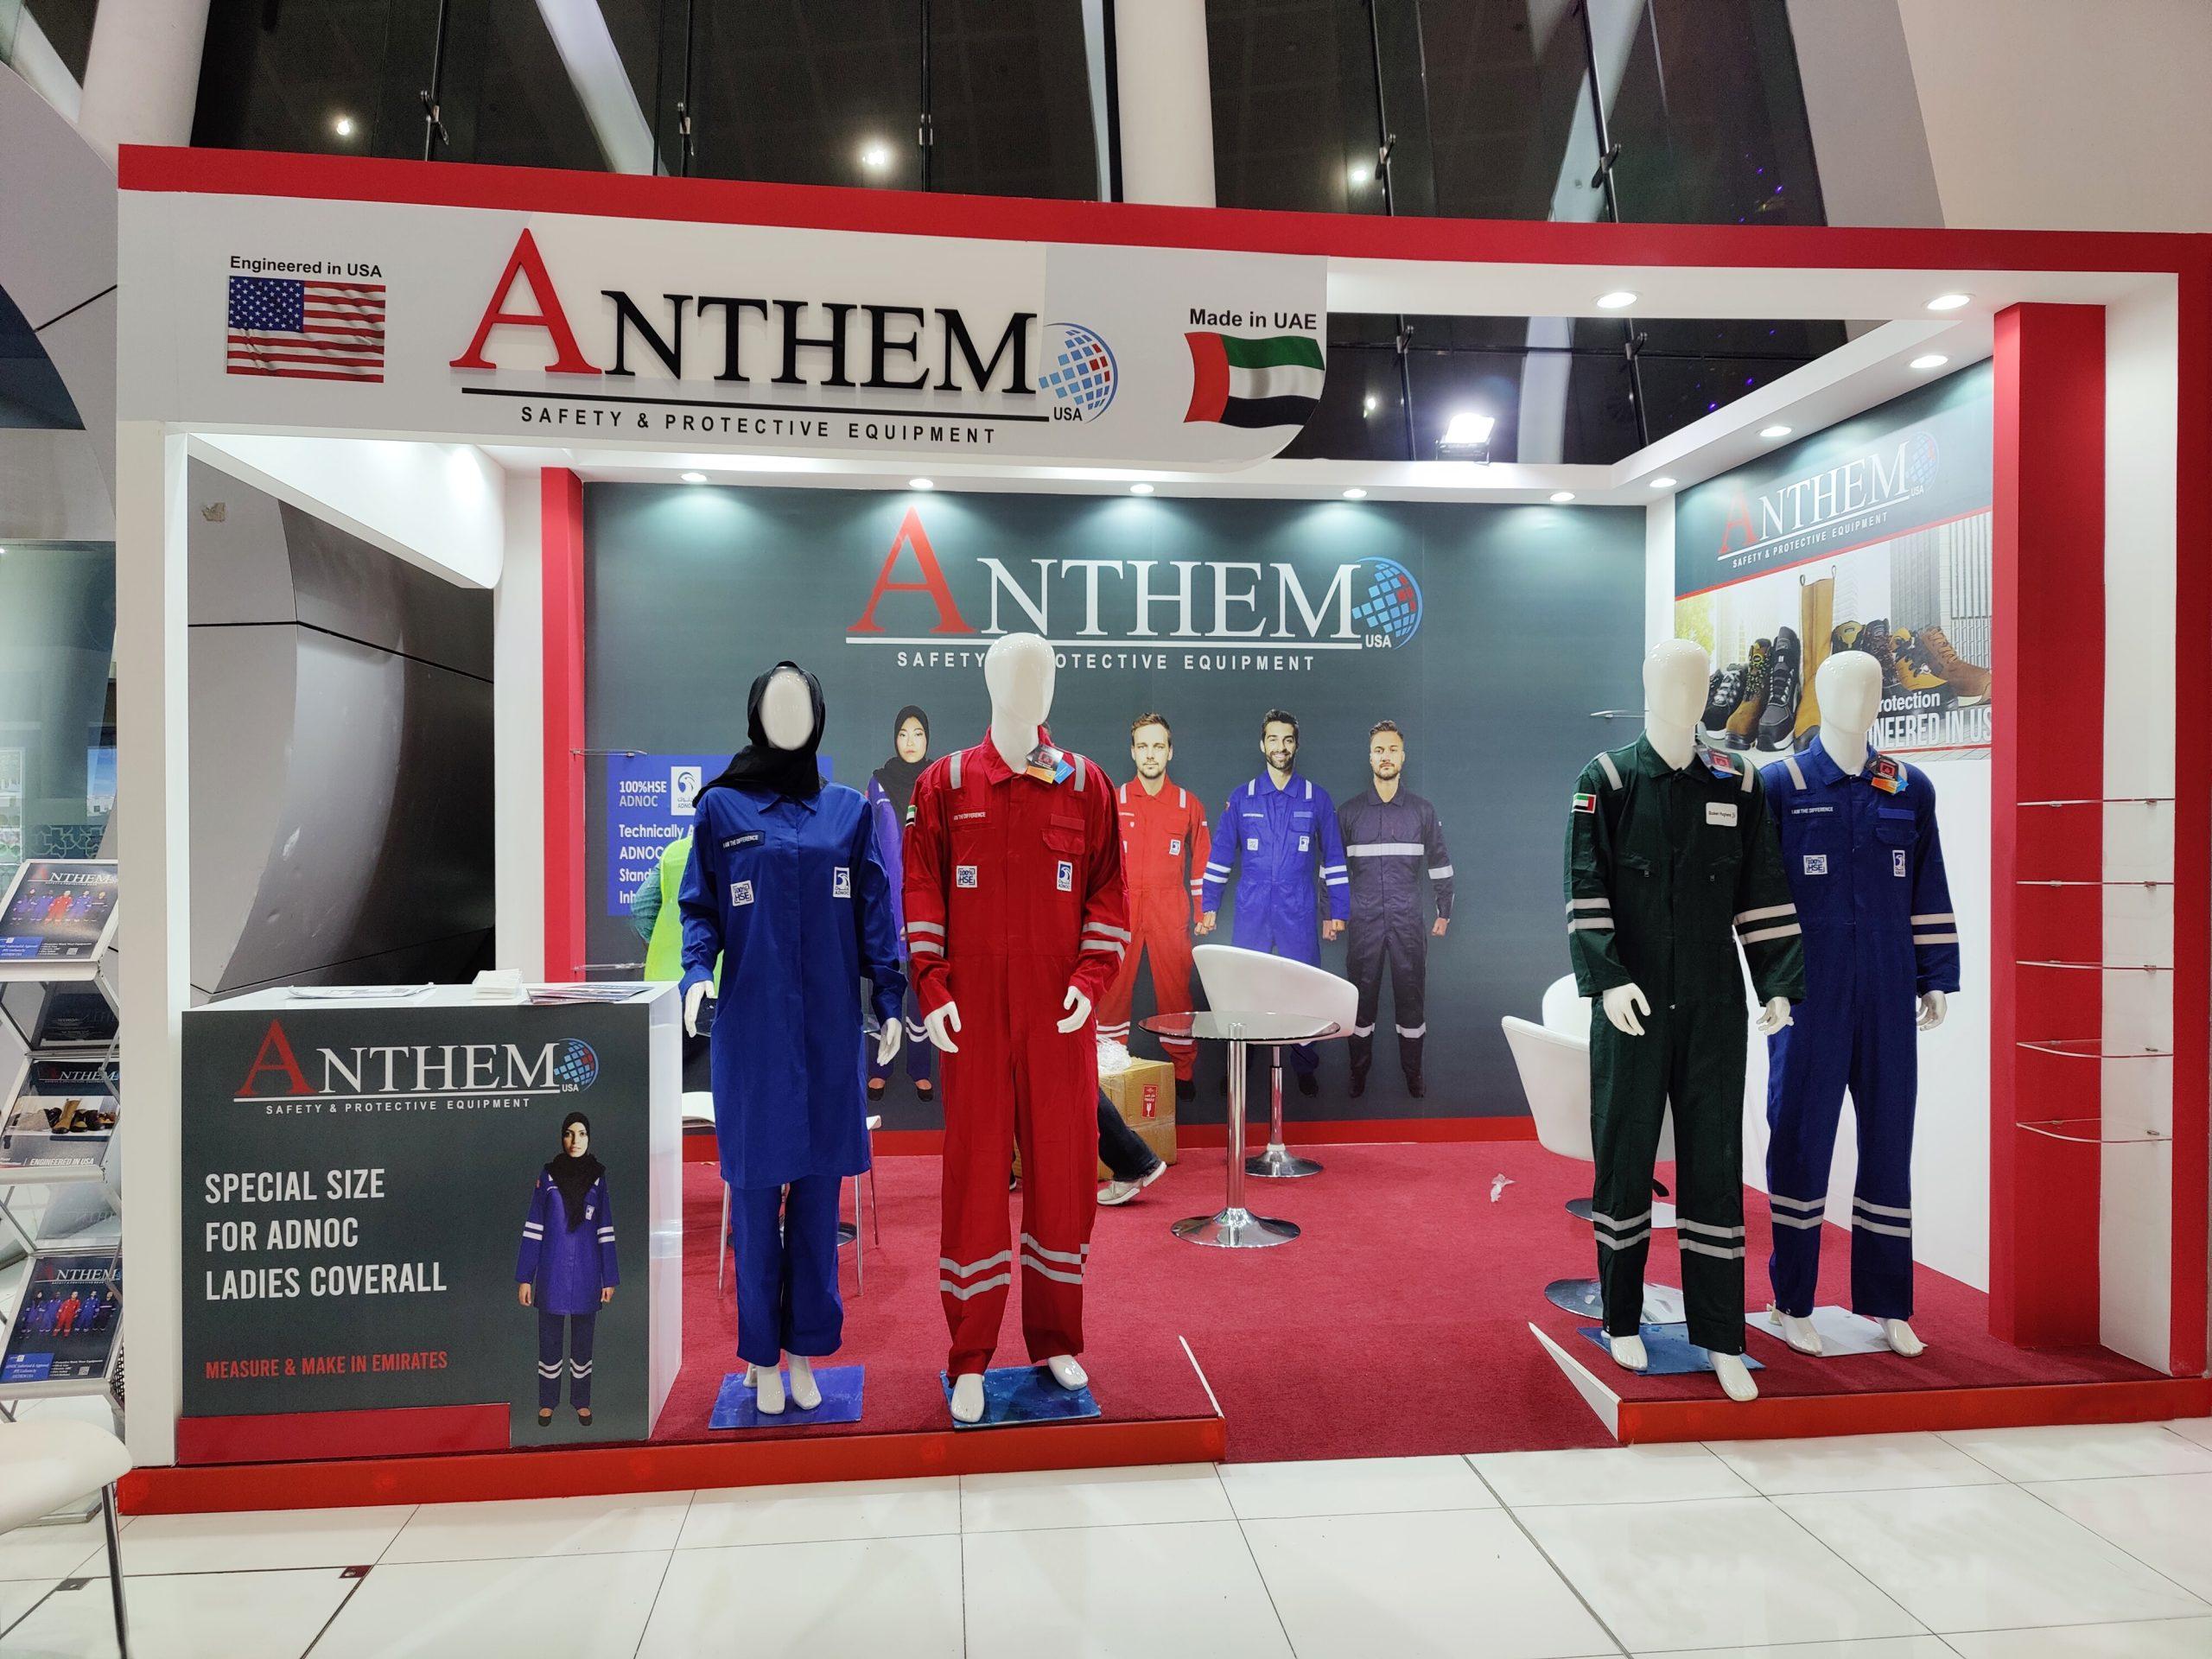 Exhibition Booth Buildup of ANTHEM